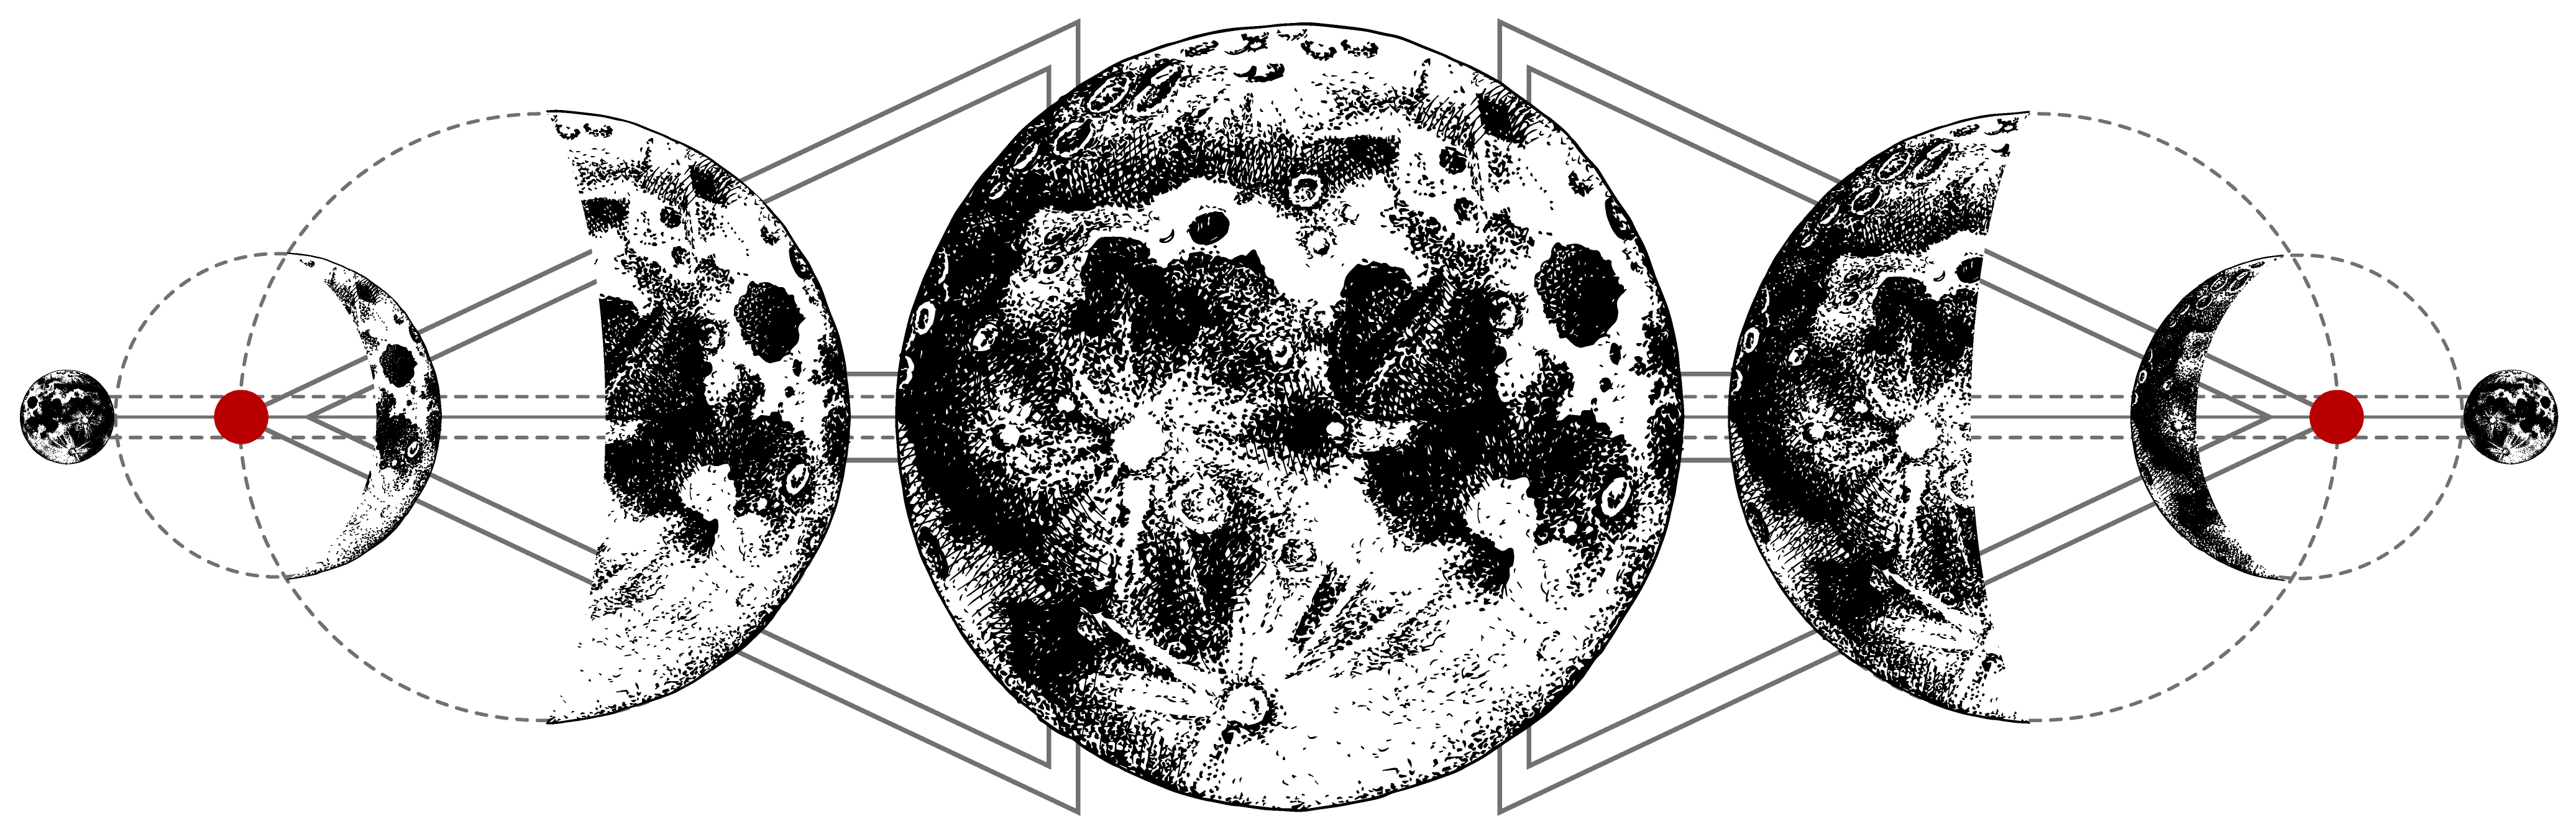 Geometric mountain in a diamonds with moon (tattoo style - black and white)  - Mountain - Posters and Art Prints | TeePublic